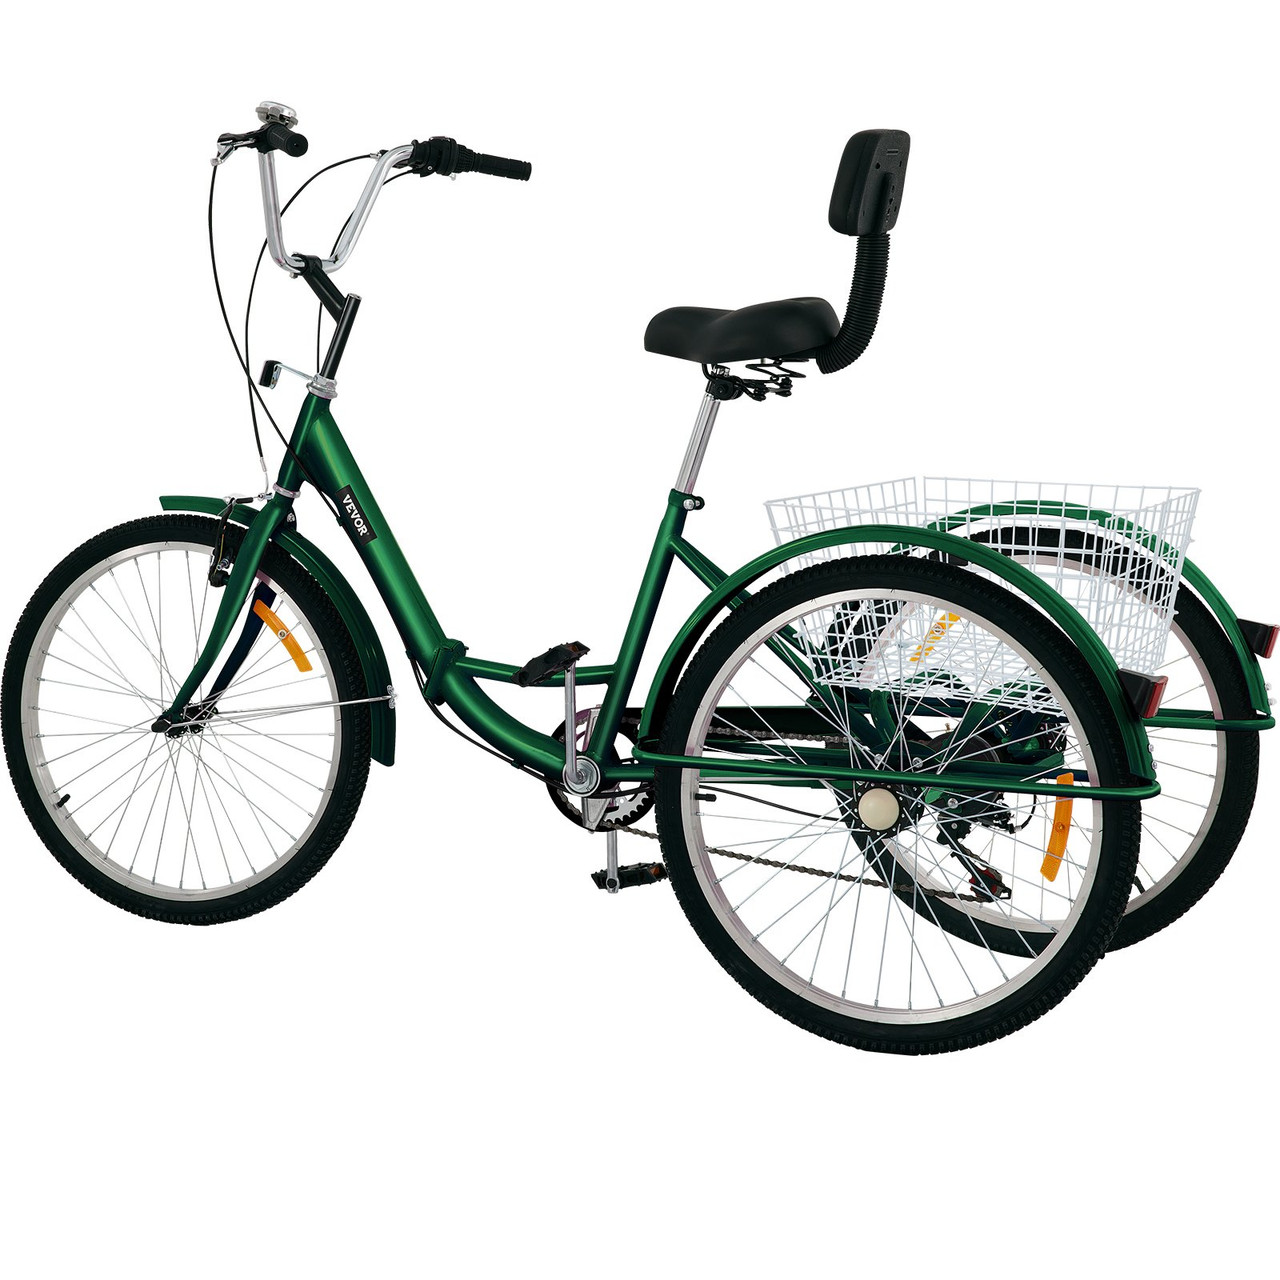 VEVOR Tricycle Adult 24“ Wheels Adult Tricycle 7-Speed 3 Wheel Bikes For Adults Three Wheel Bike For Adults Adult Trike Adult Folding Tricycle Foldable Adult Tricycle 3 Wheel Bike Trike For Adults